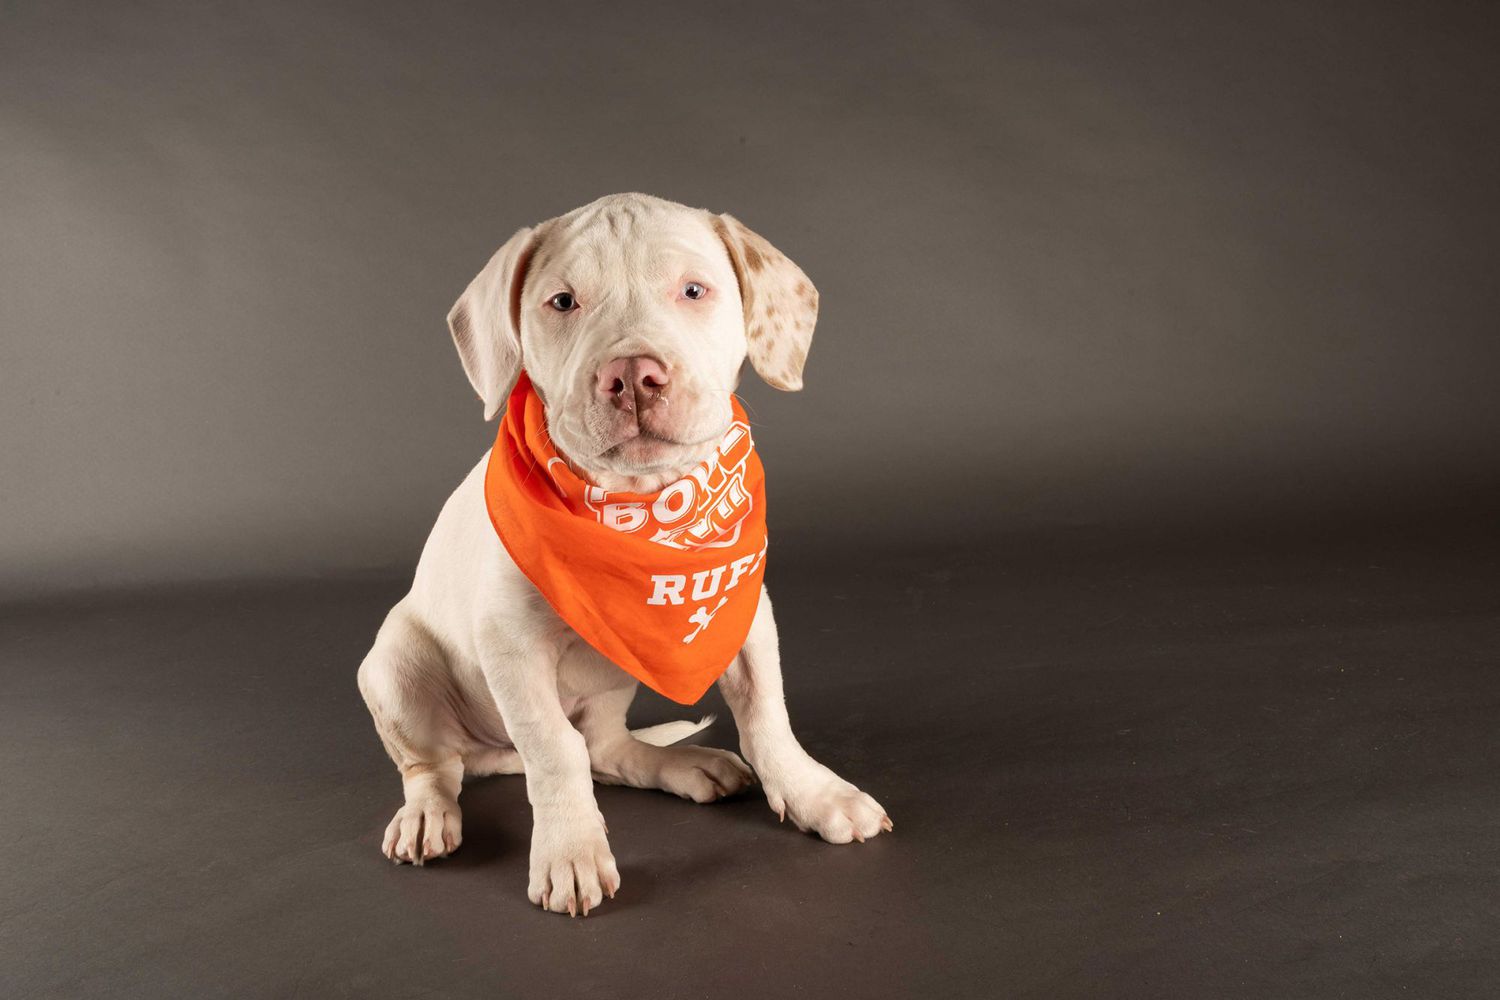 Meet the 6 Amazing Special Needs Dogs Competing in the 2021 Puppy Bowl